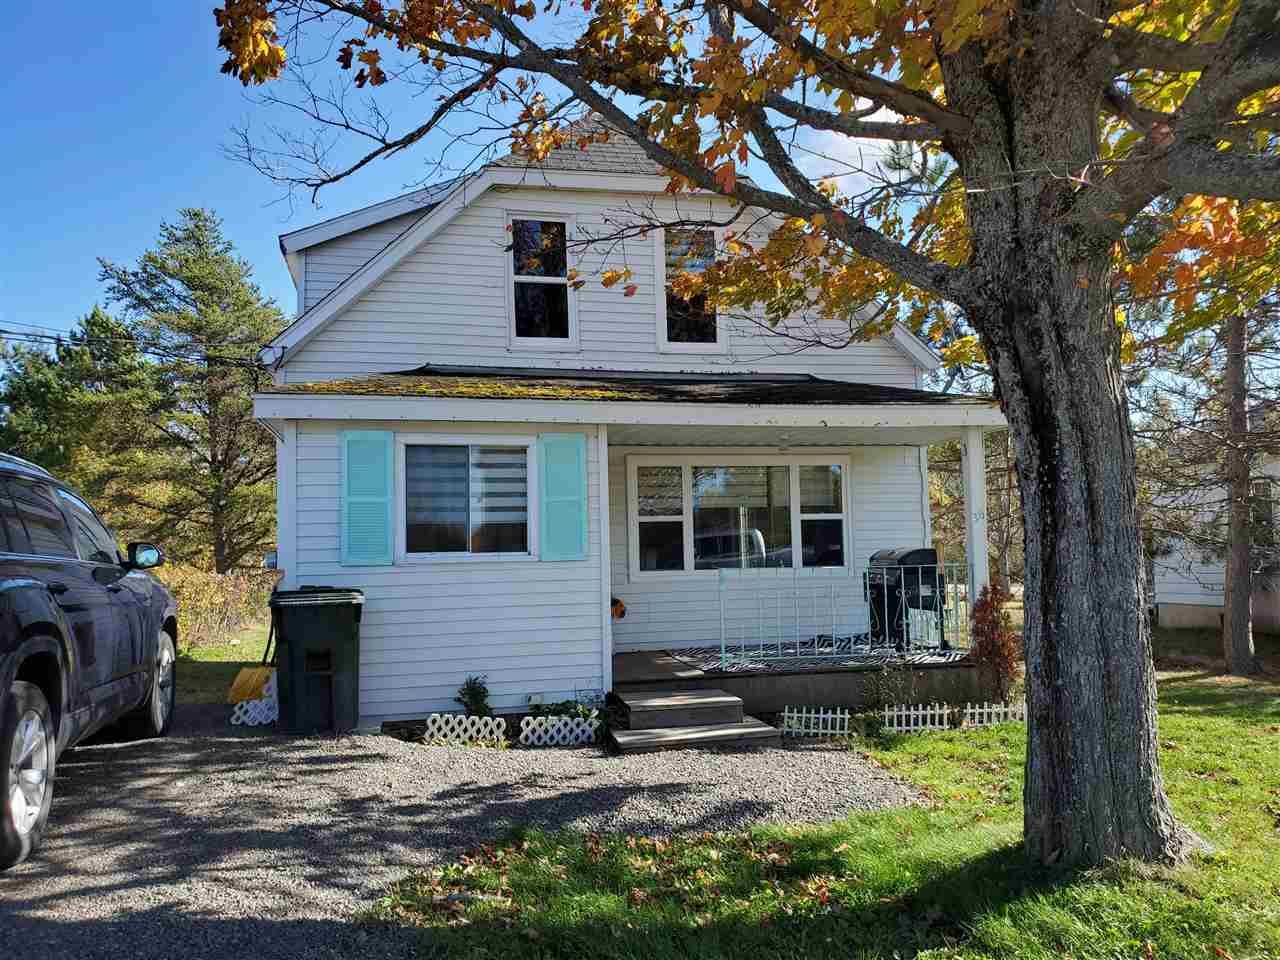 Main Photo: 36 Cowan Street in Springhill: 102S-South Of Hwy 104, Parrsboro and area Residential for sale (Northern Region)  : MLS®# 202021740